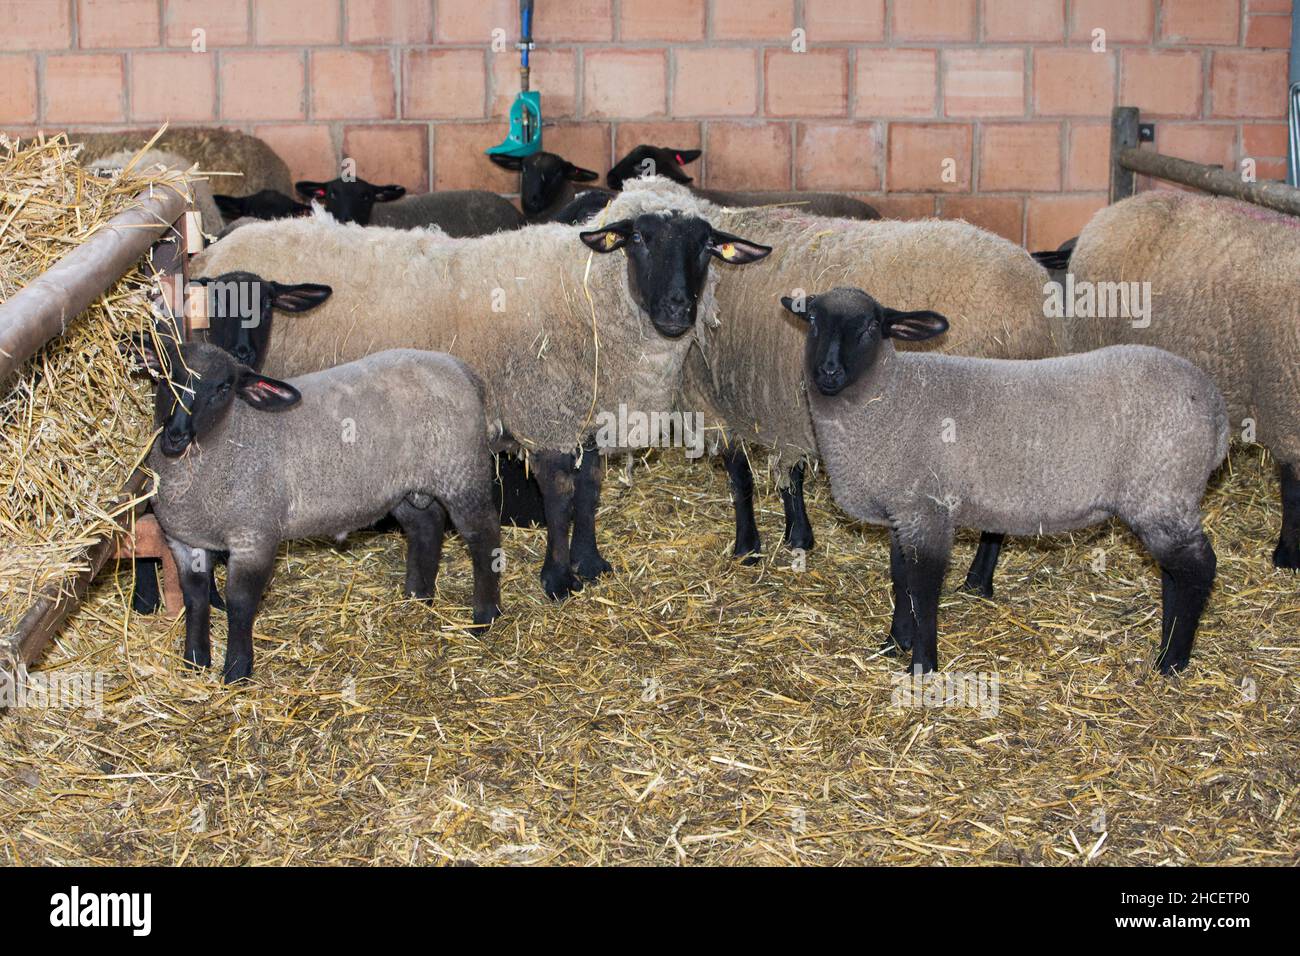 Suffolk sheep in stall with lambs bred for mutton, Lower Saxony Germany Stock Photo